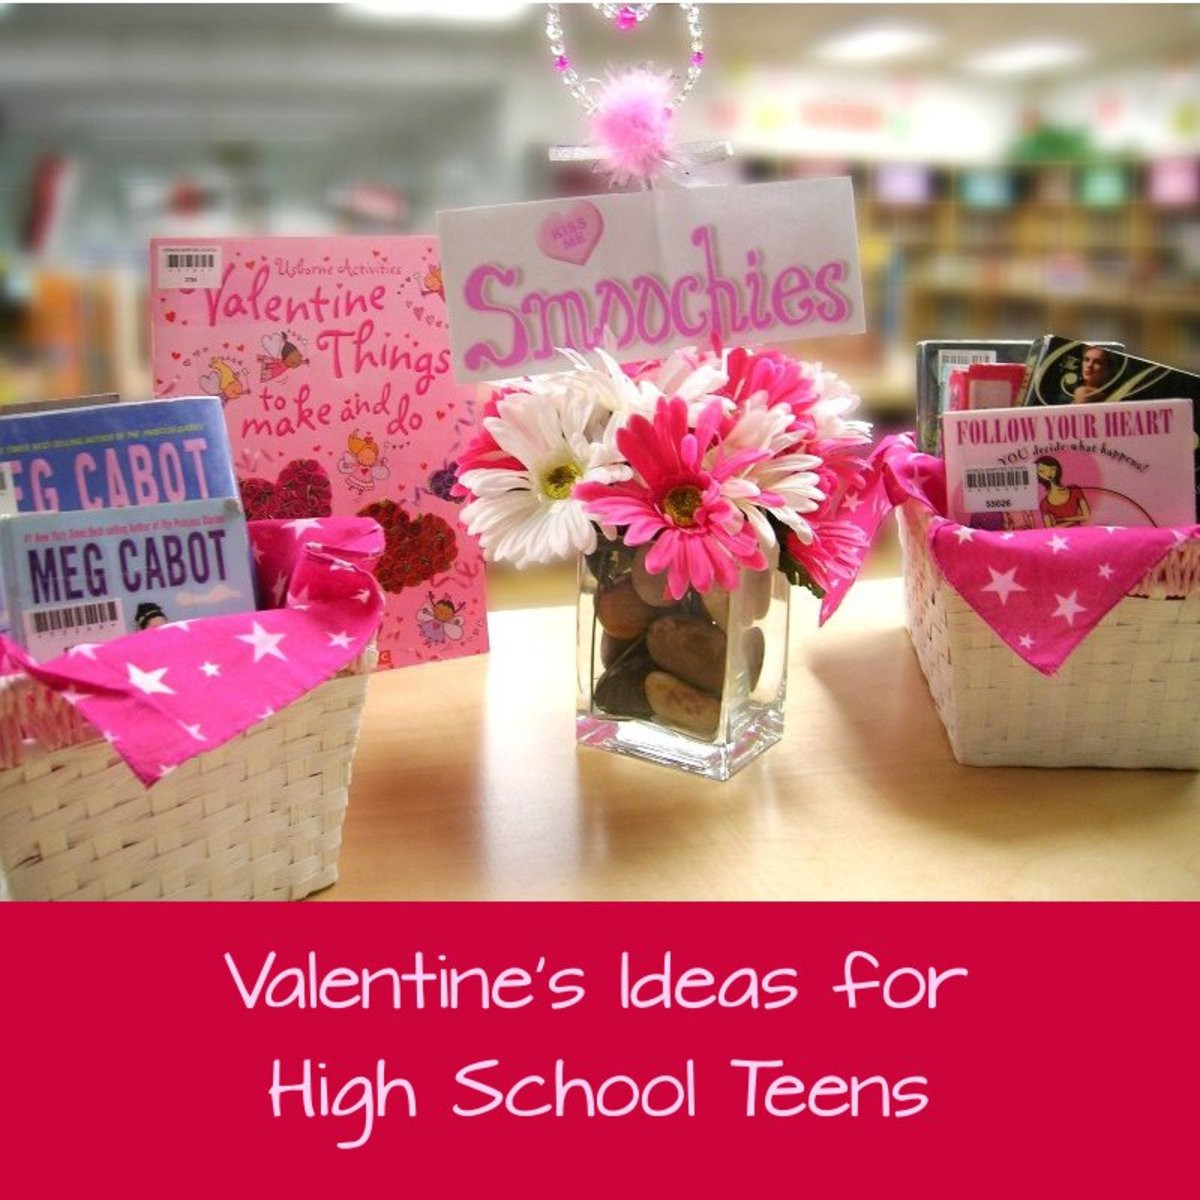 Valentines Gift Ideas For Girls
 Valentine s Day Gift Ideas for High School Teens